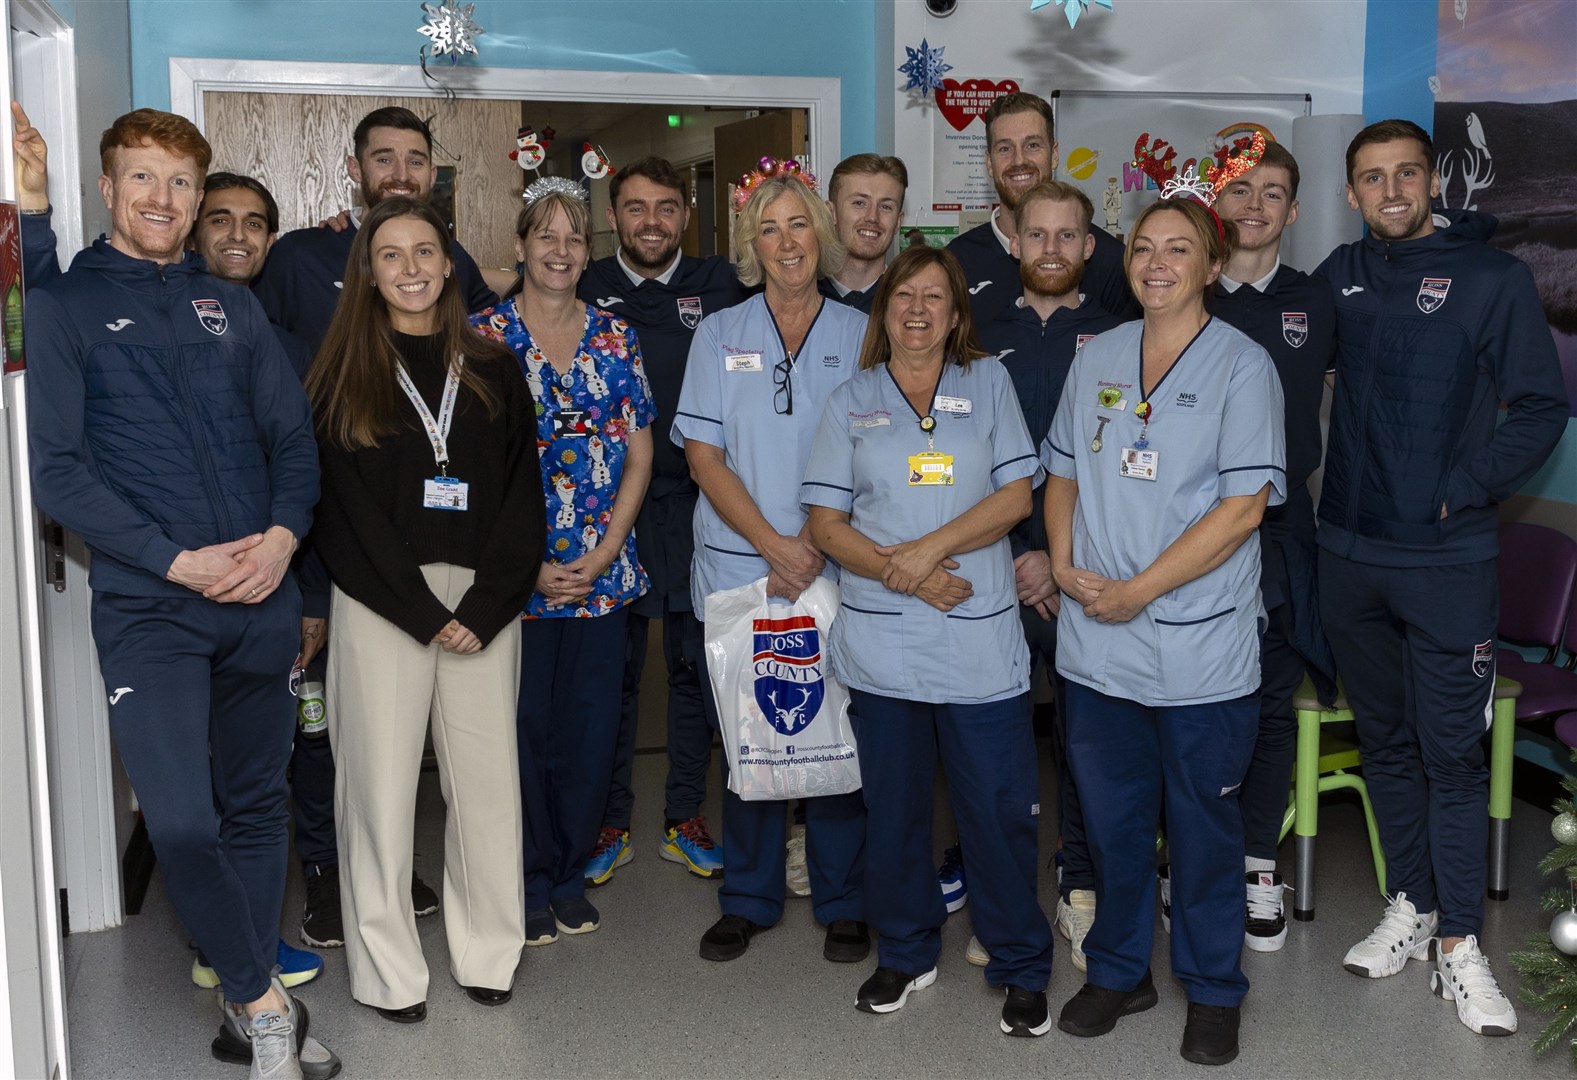 (from left to right) Simon Murray, Yan Dhanda, Jack Baldwin, Connor Randall, Kyle Turner, Jordan White, Josh Sims, Jay Henderson and Ben Purrington pictured with staff in the Highland Children’s Unit. Picture: Ken Macpherson